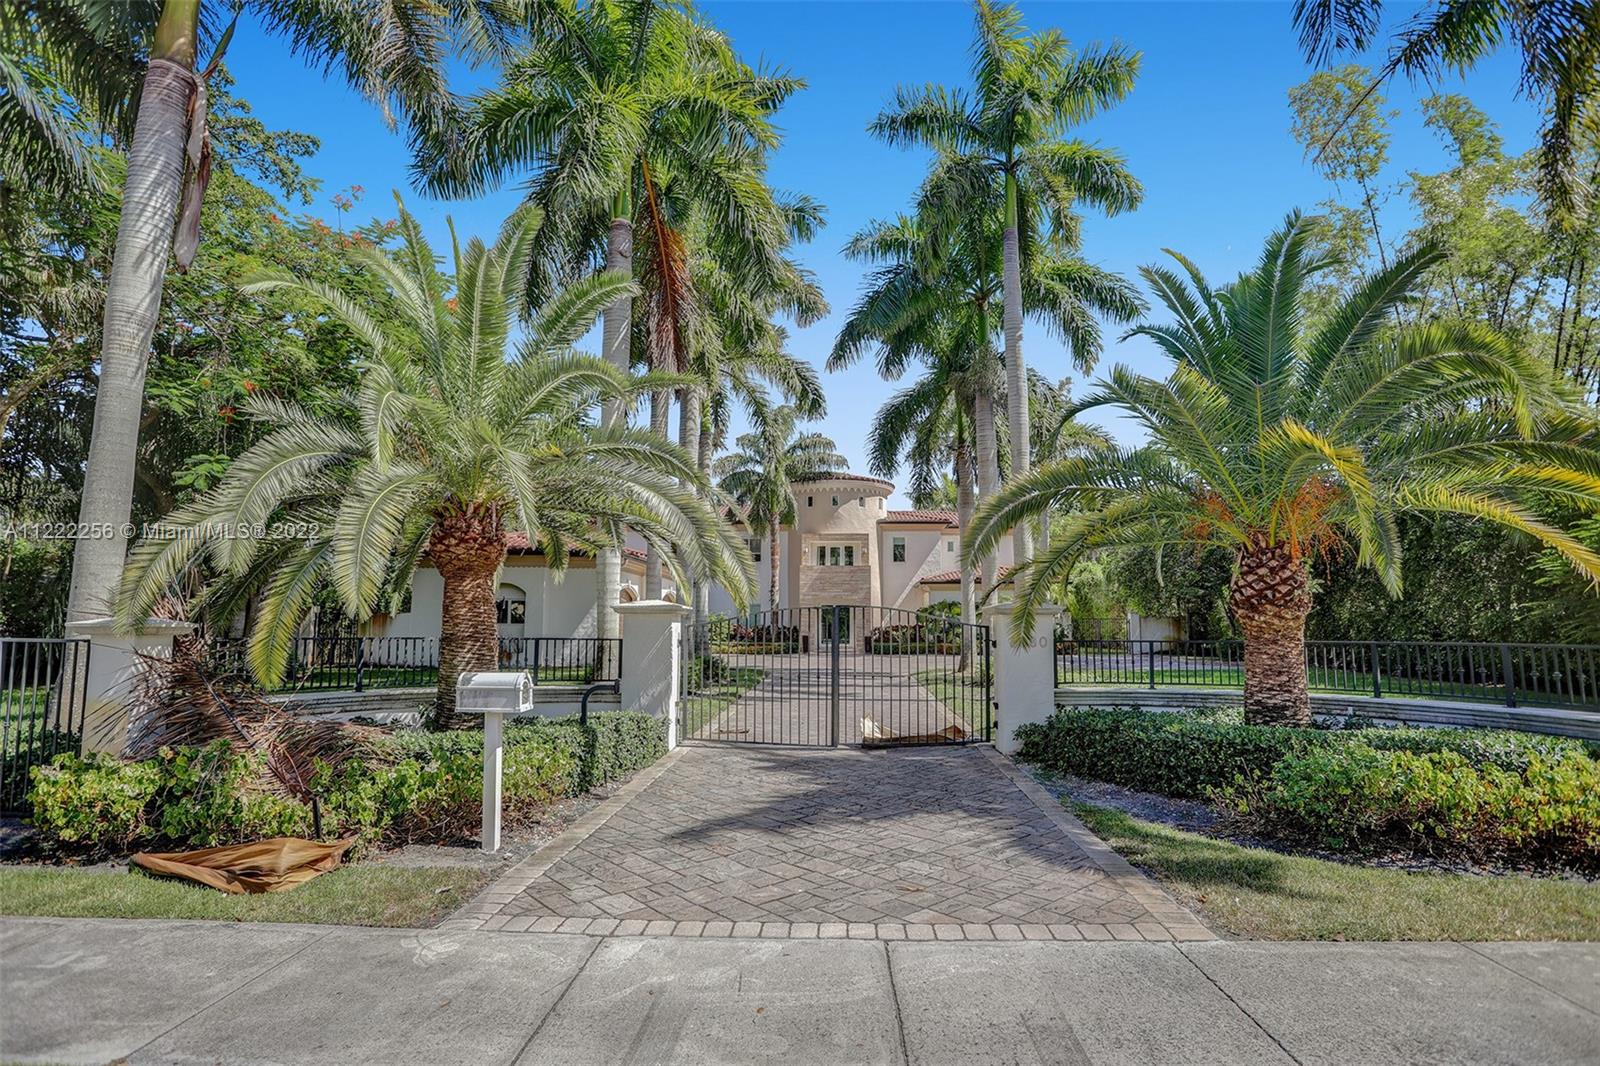 No longer a short sale , REO owned and ready to sell . Gated Mediterranean Mansion in the northern  Pinecrest area better known as Palacio De Las Palmas.7/8.5, two office, two dens & theater room  with over 11,000 sqft  home built in 2012 and on a deep 40,000 lot. master suite that includes 2 large walk-in closets and state of the art spa like bathroom on the first floor, formal living and dining, butlers pantry, elevator, fireplace, separate guest house, 3 car garage with space for a 3 car lifts , service wing including bedroom /bath and laundry facility. Upstairs you are greeted by 4 generous bedrooms all with private bathrooms, second family room, sprawling outdoor terraces with salt water heated pool as well as plenty of fruit trees makes this a great opportunity .